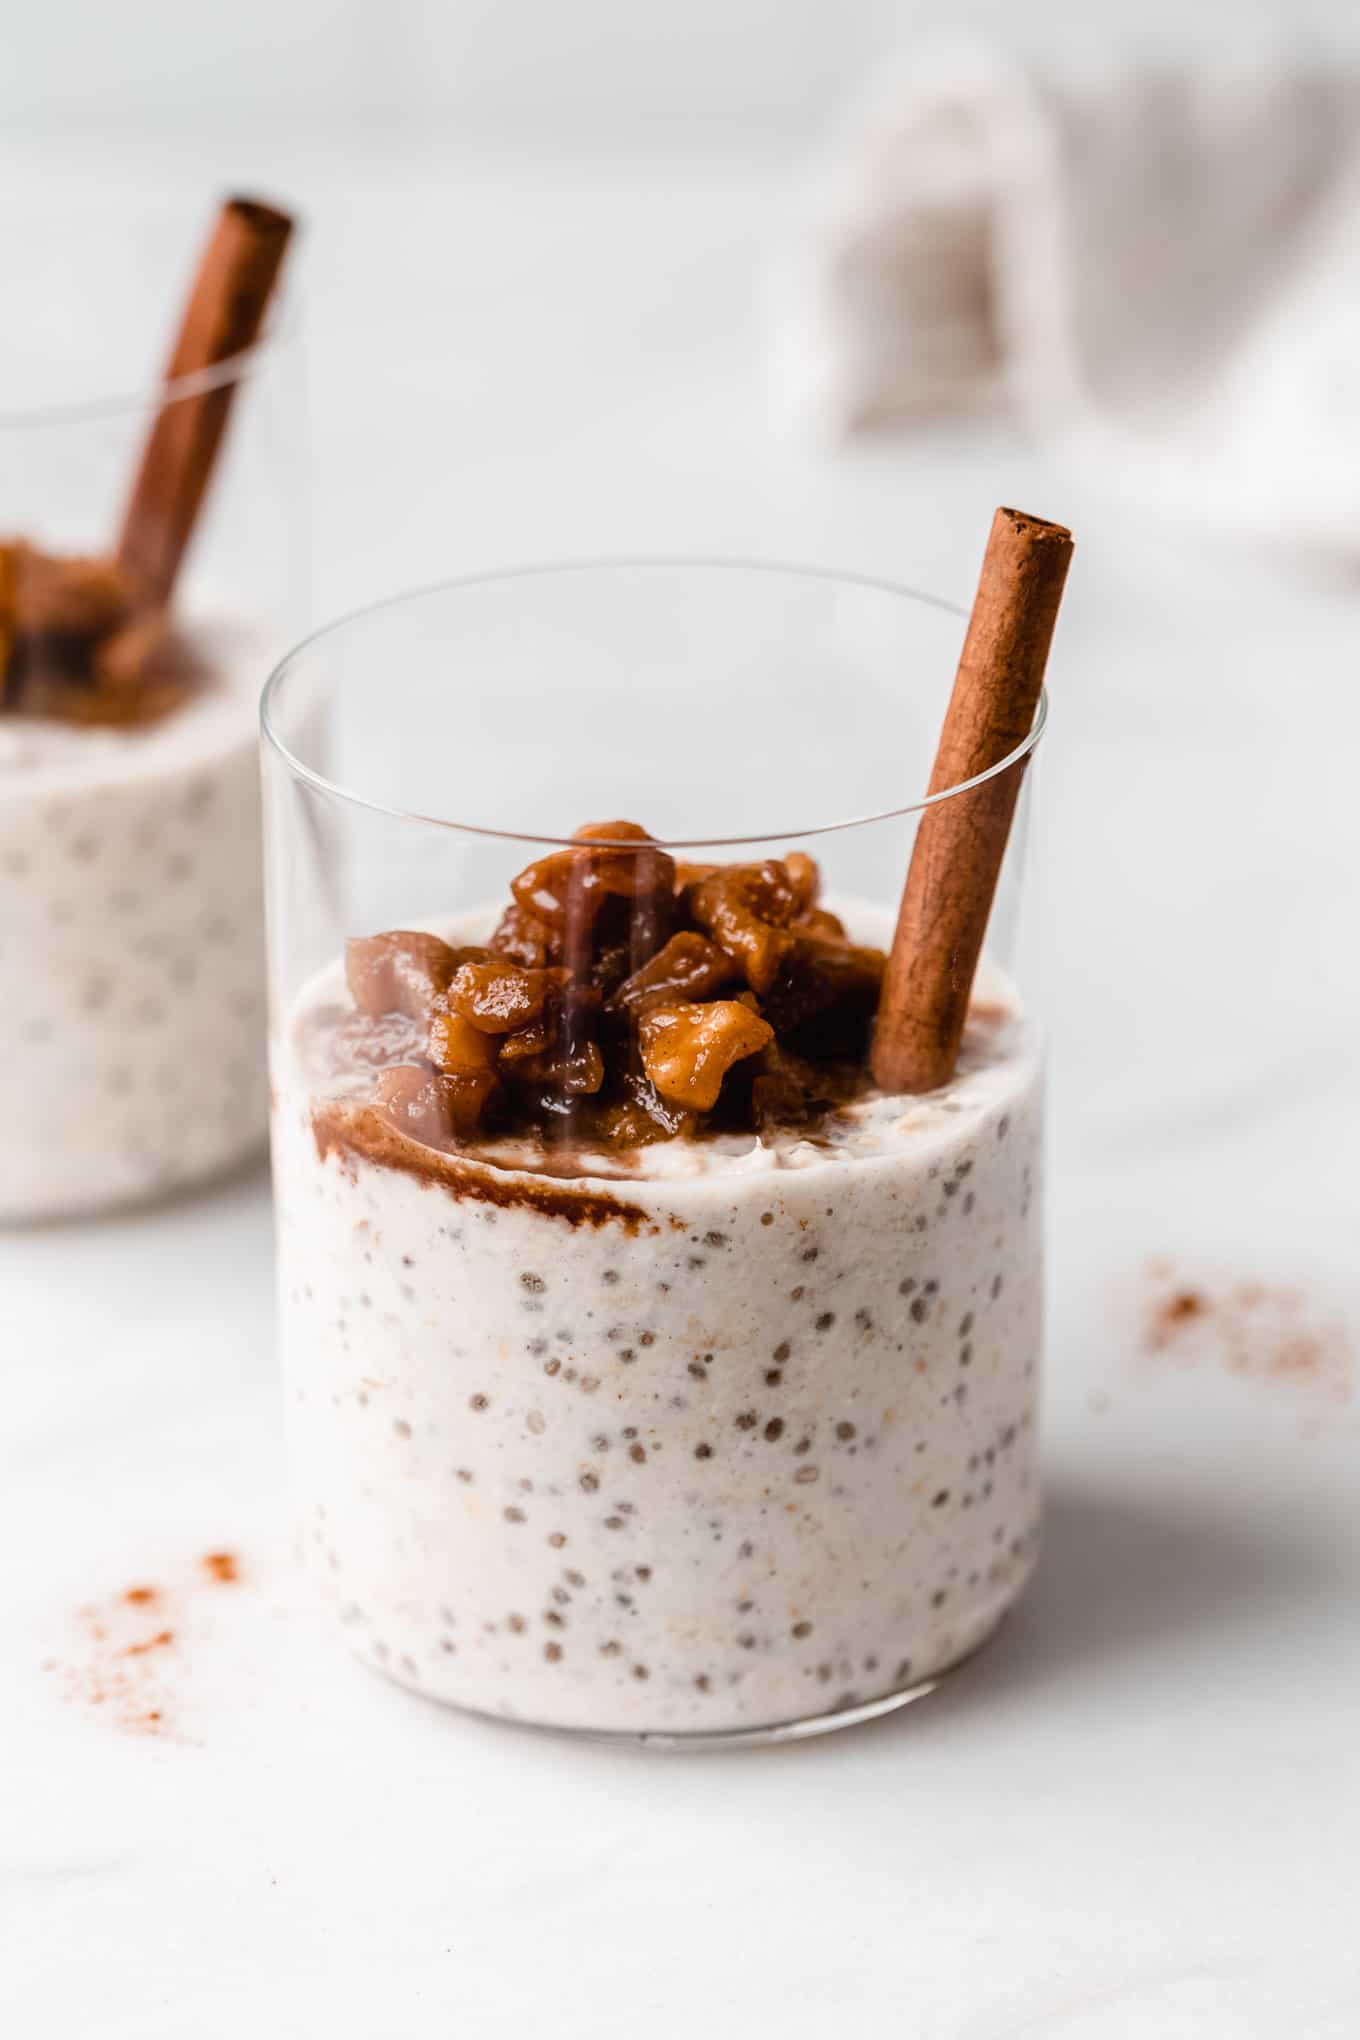 Apple Pie Overnight Oats - All the Healthy Things